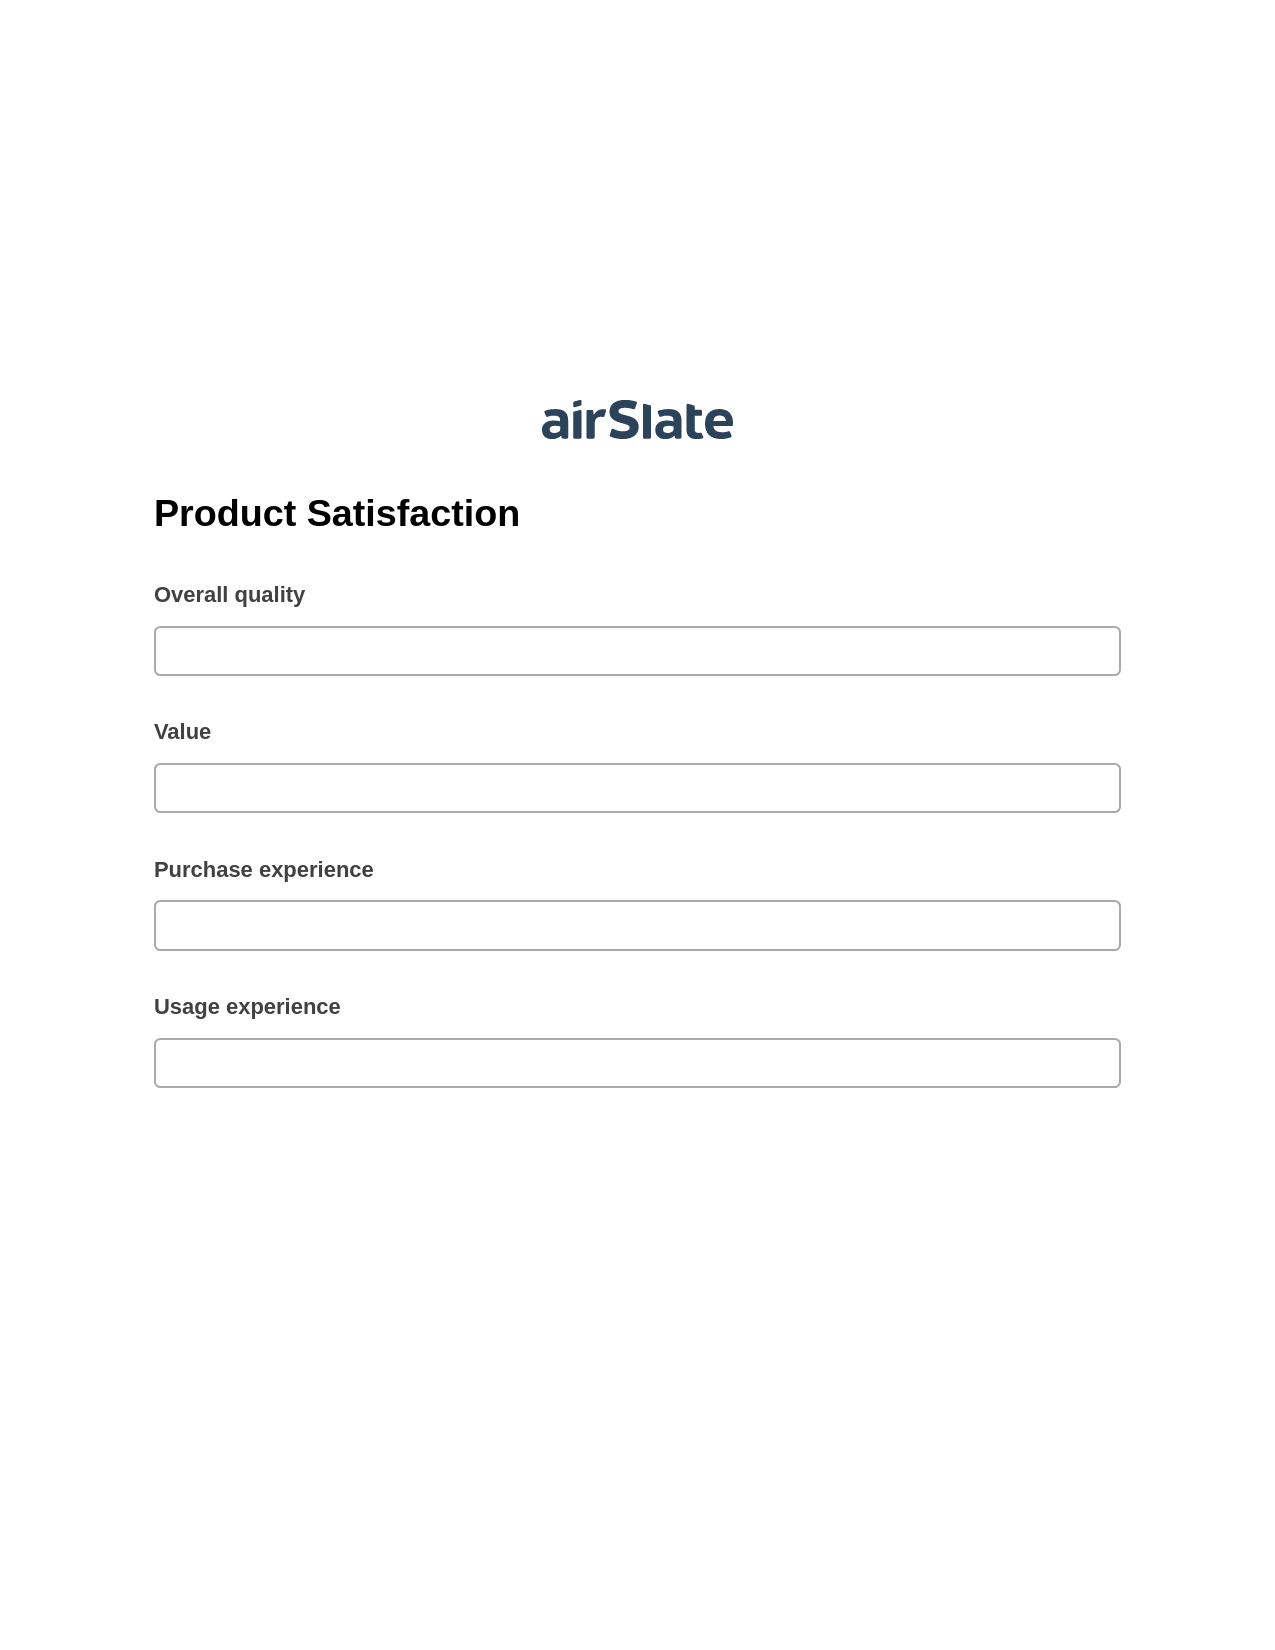 Product Satisfaction Pre-fill Dropdown from Airtable, SendGrid send Campaign bot, Export to Formstack Documents Bot